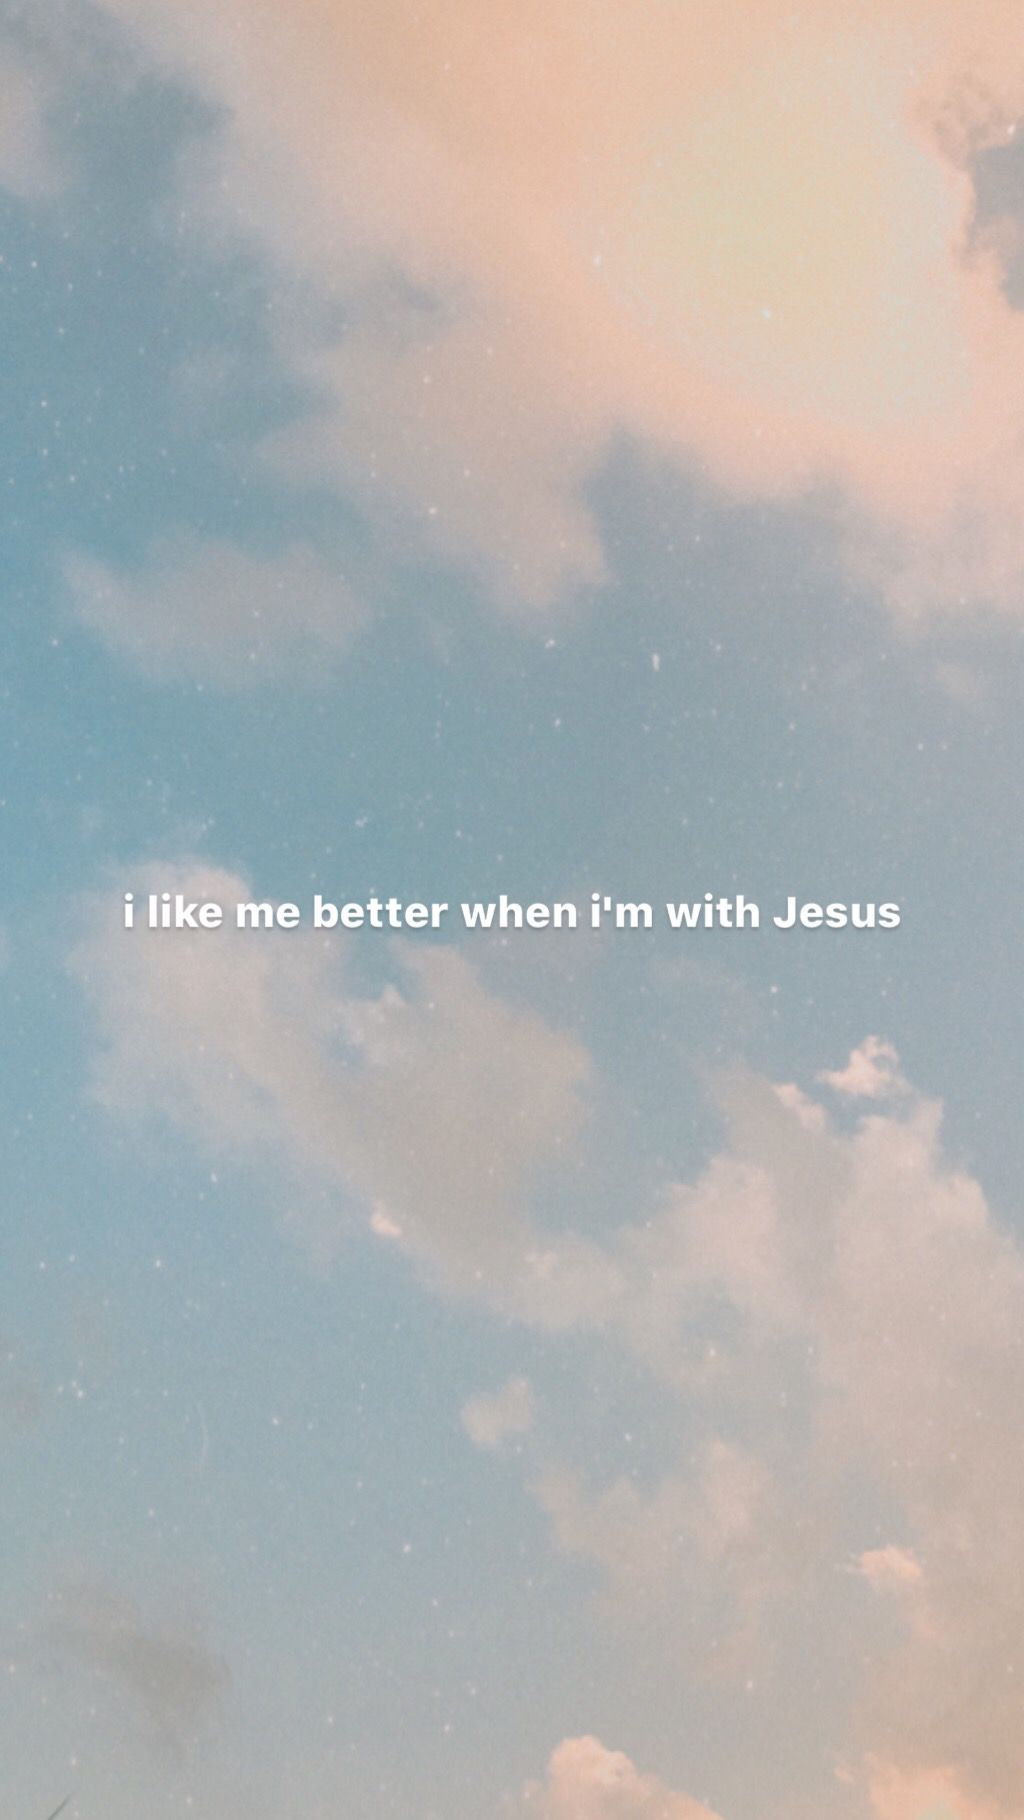 i like me better when im with Jesus. Christian quotes jesus, Christian quotes, Bible verse wallpaper